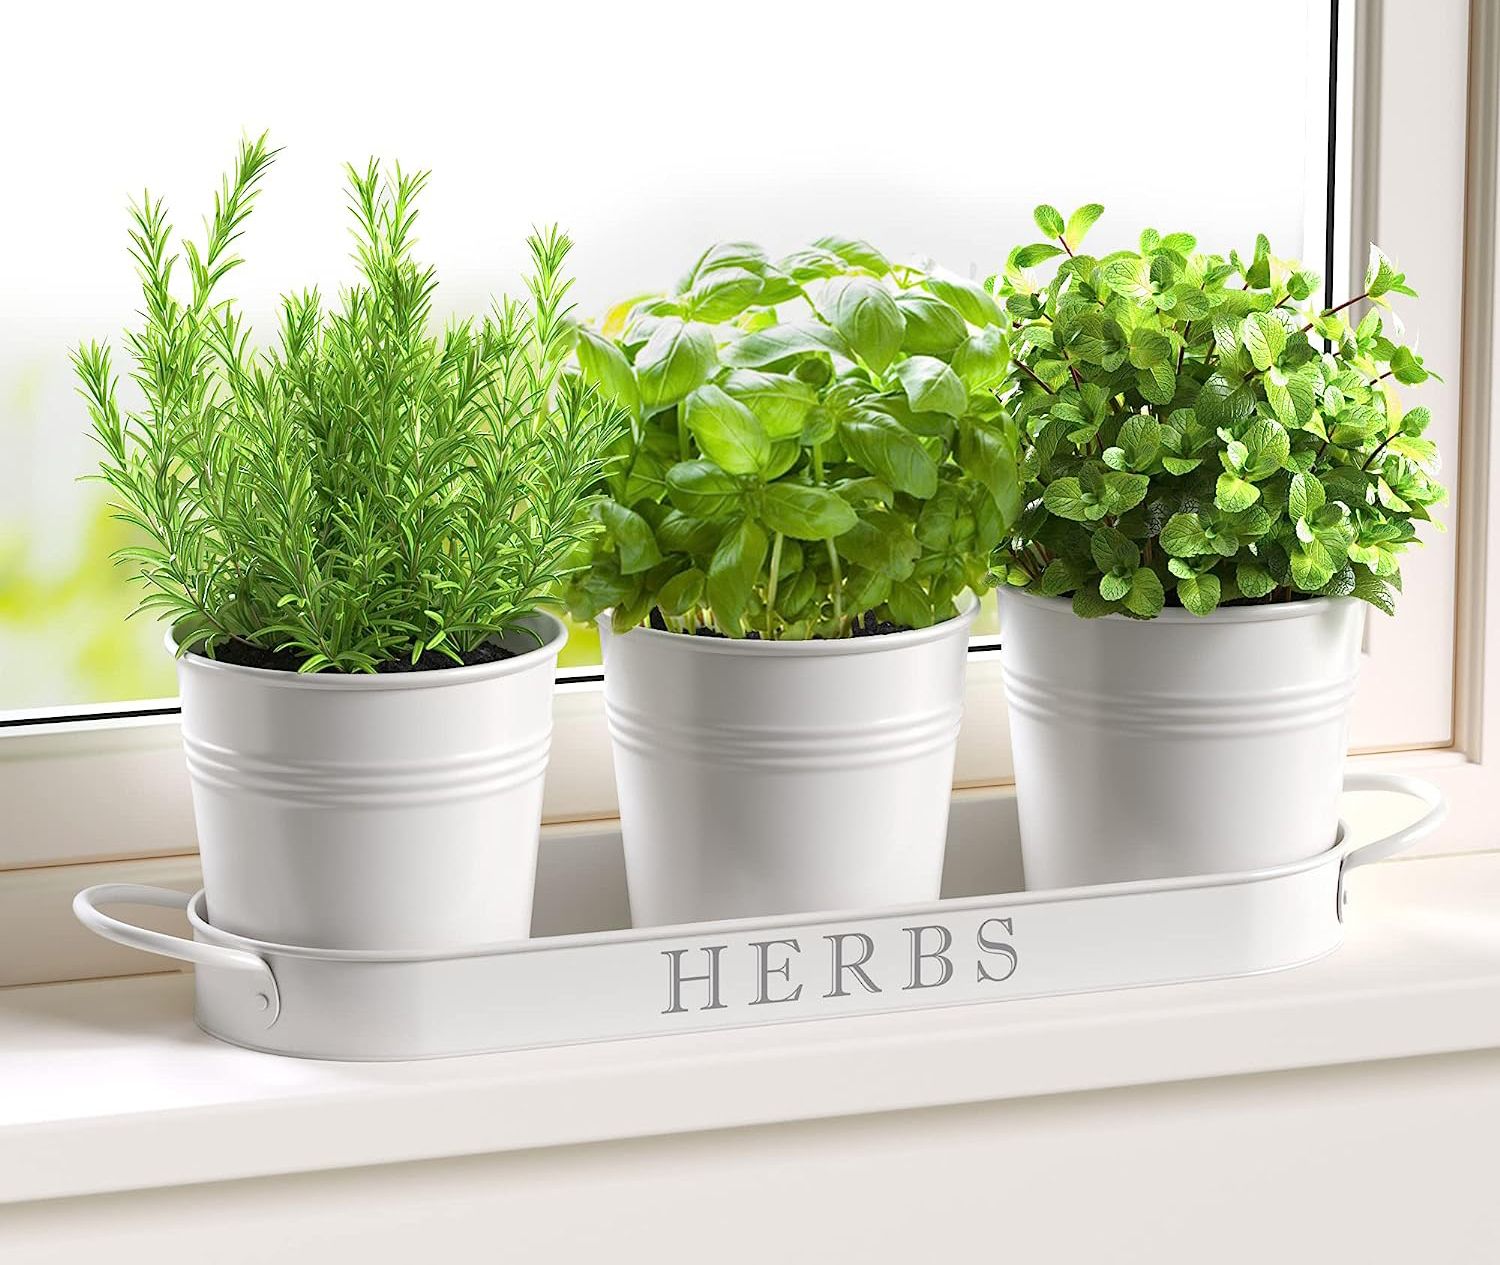 Where to Find Budget-Friendly Pots and Planters